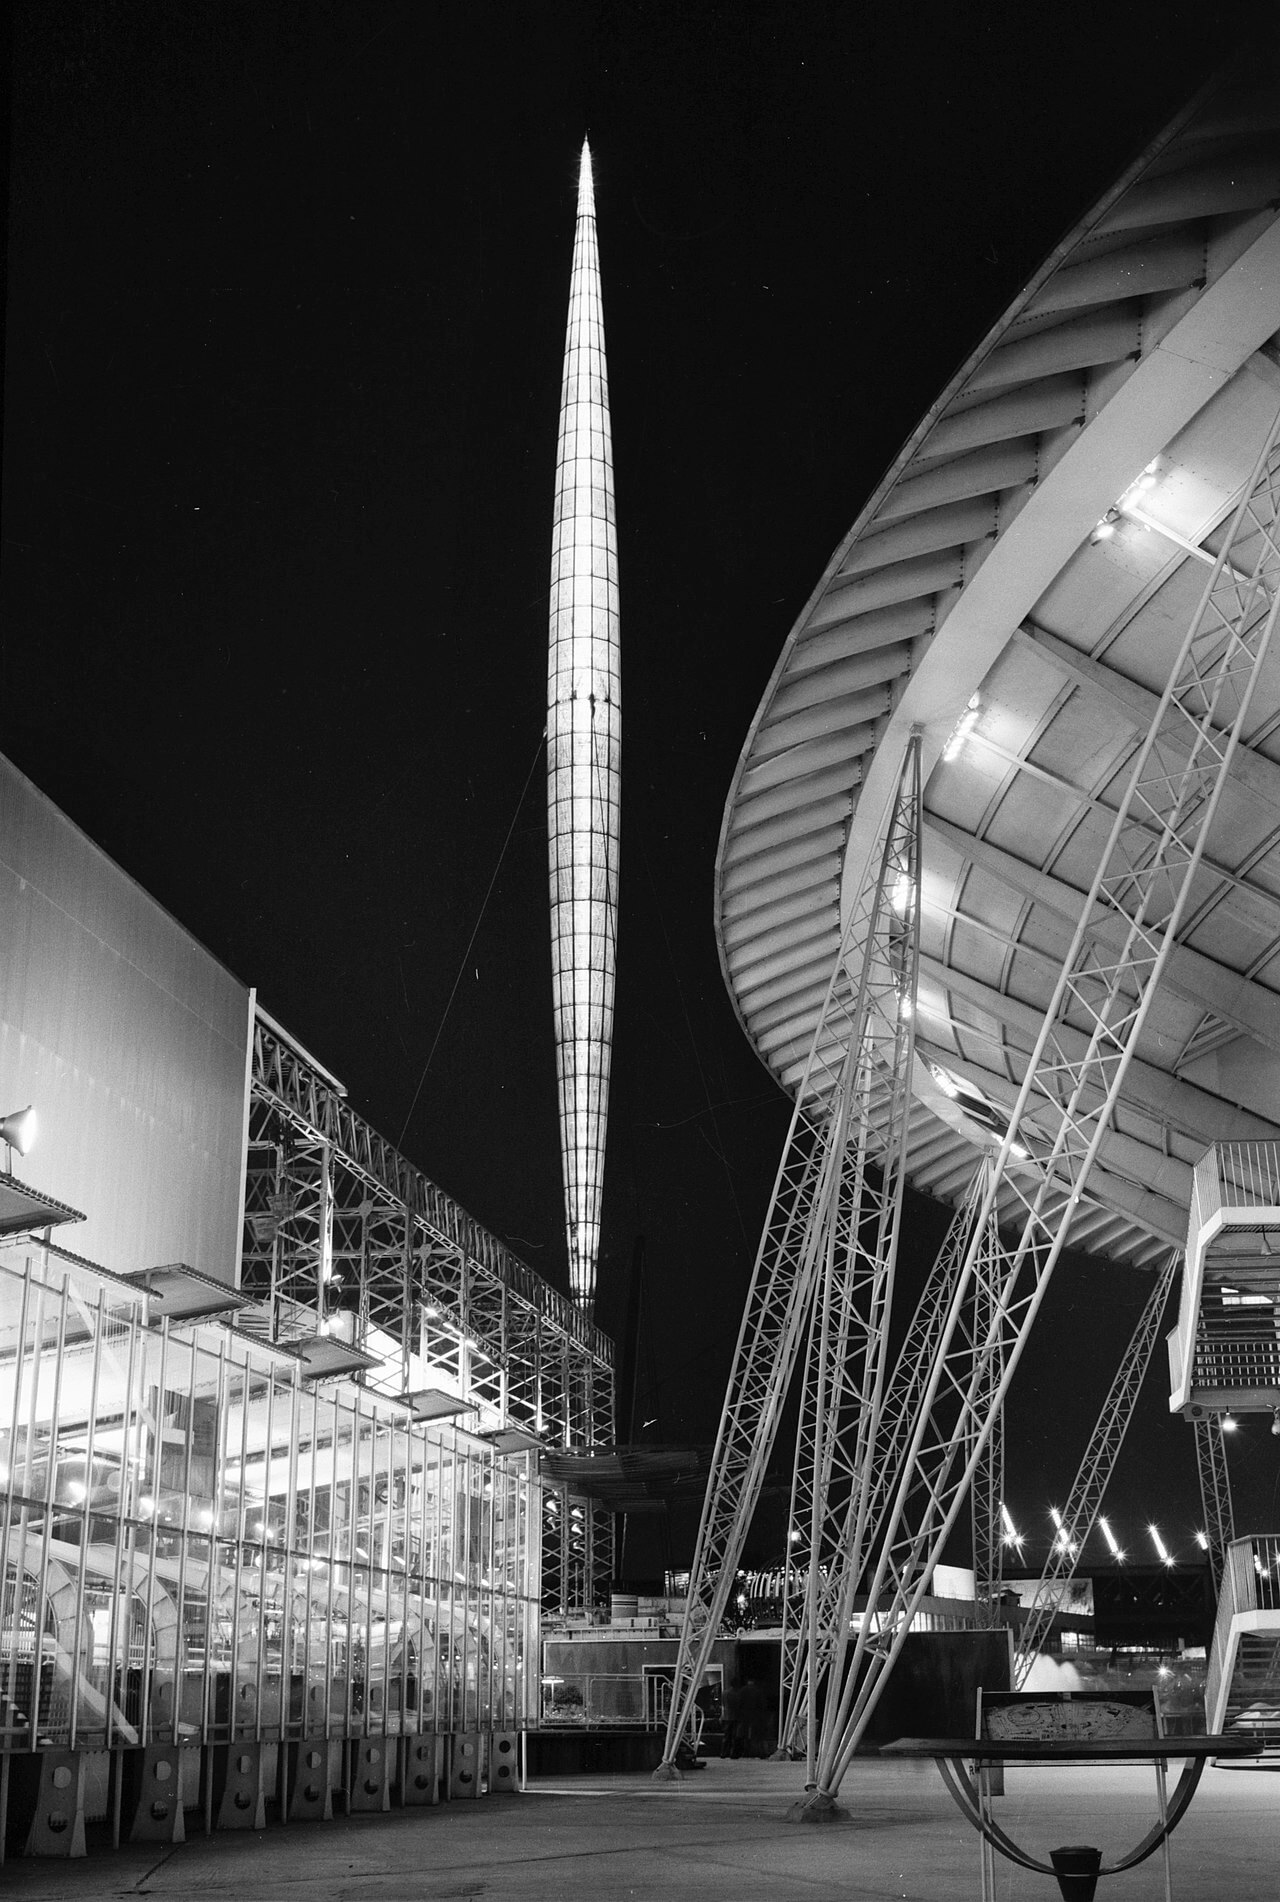 Black and white photo of a tower and tall spire